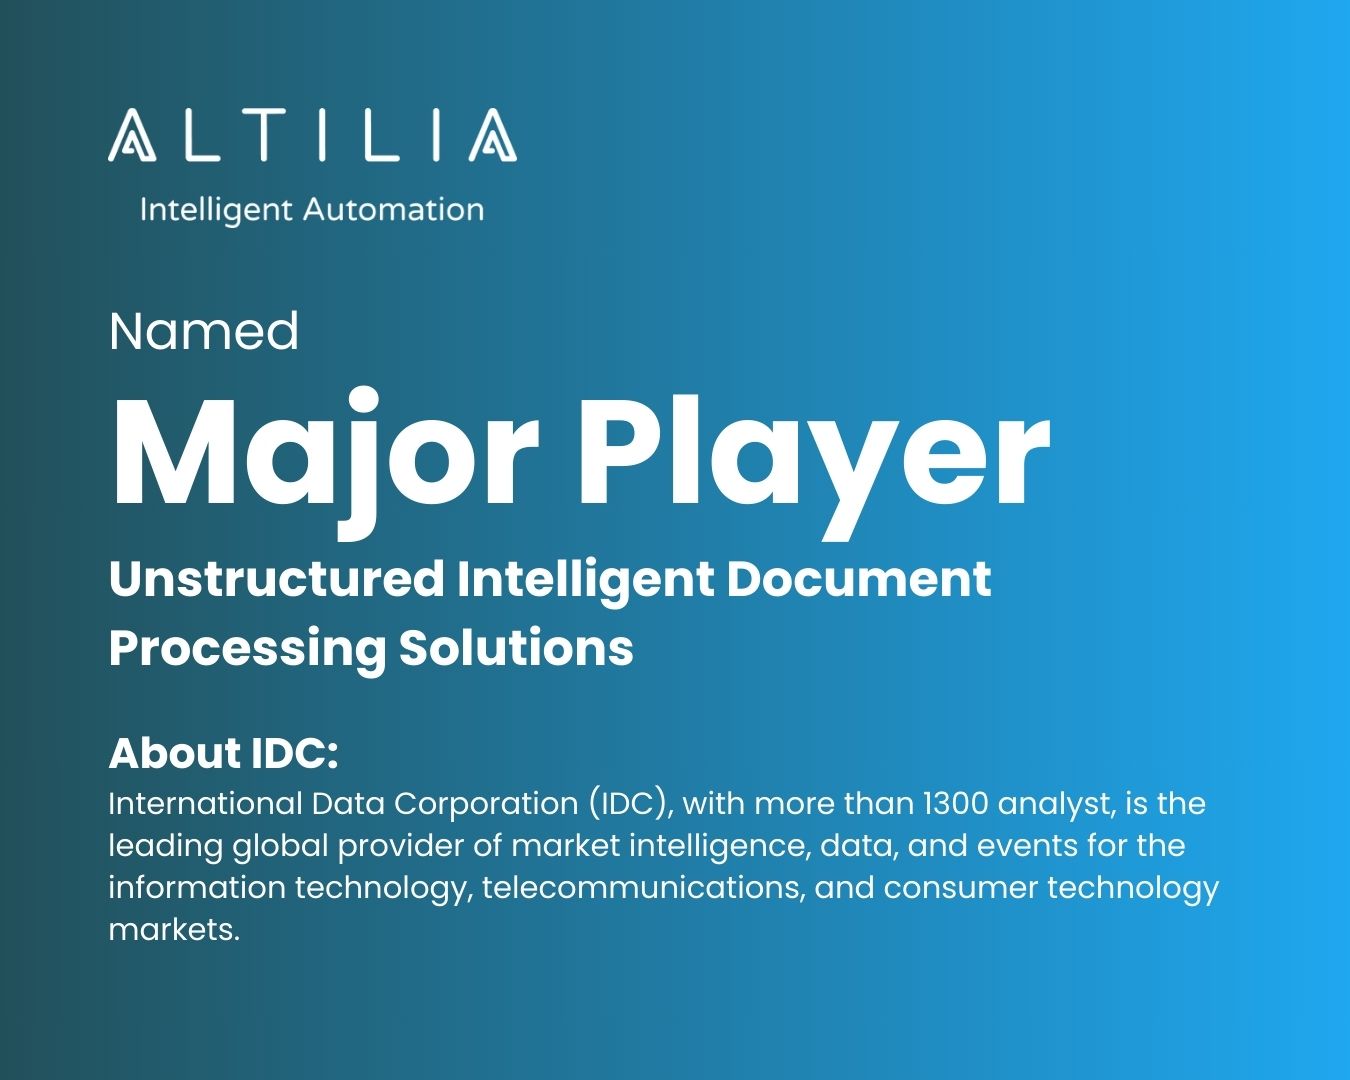 Altilia Recognized as Major Player in Unstructured Intelligent Document Processing Software by IDC